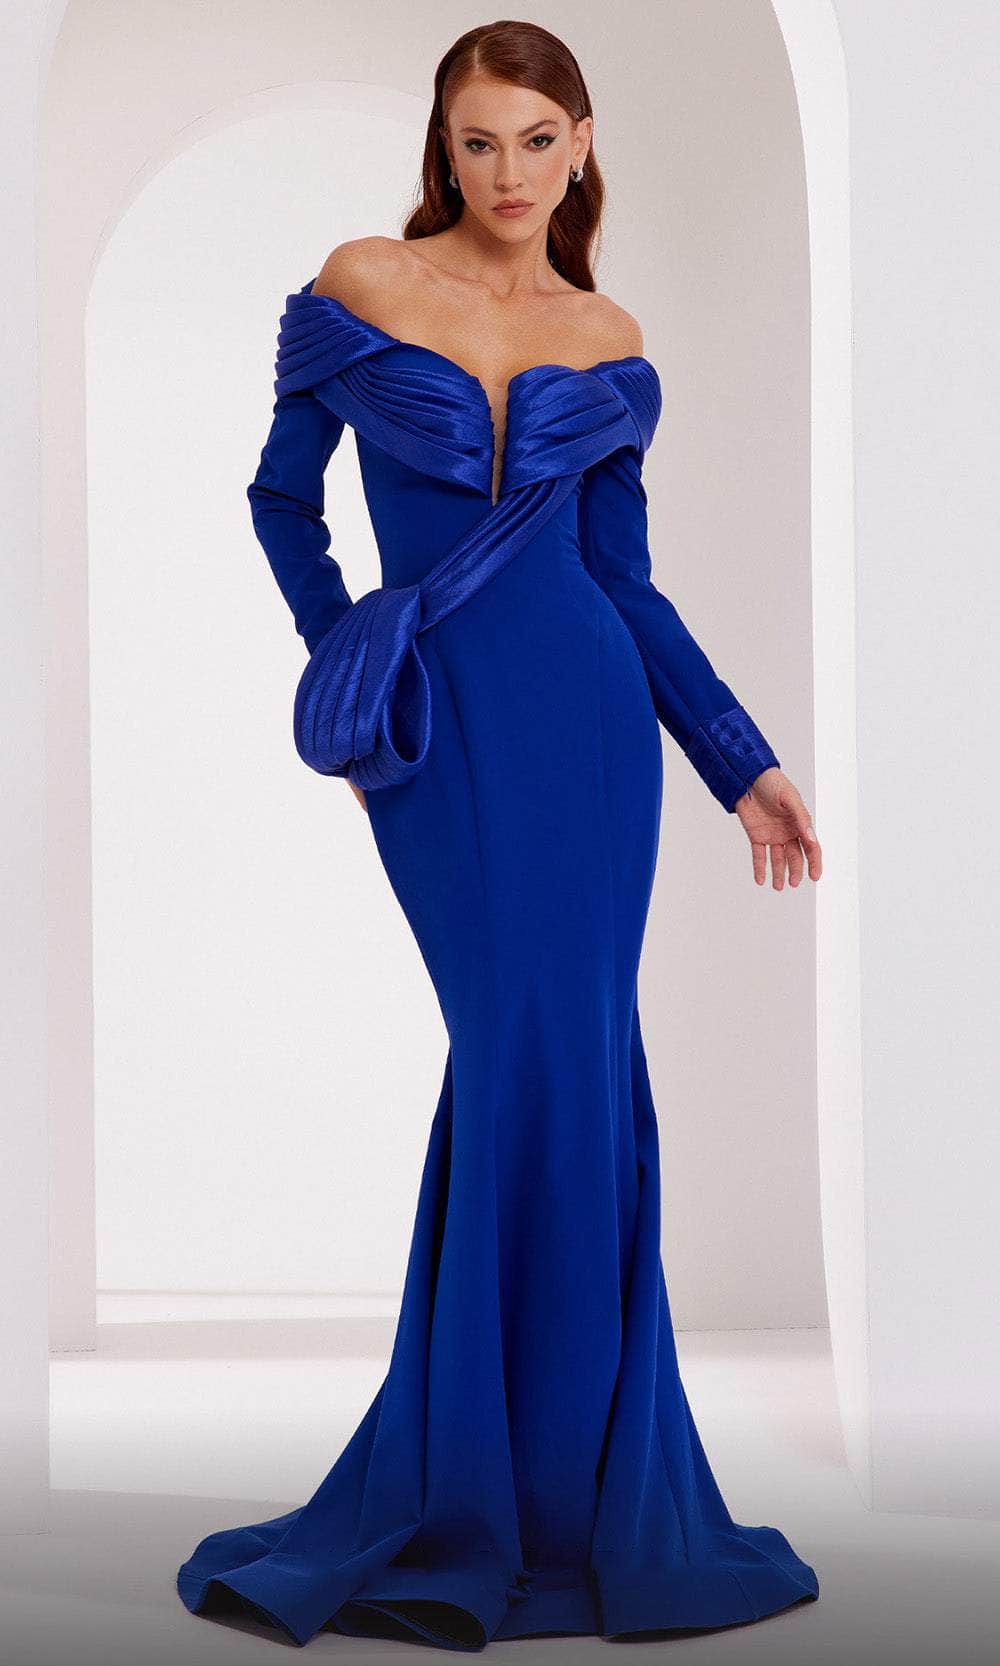 Image of MNM Couture 2791 - Drape Embellished Mermaid Gown